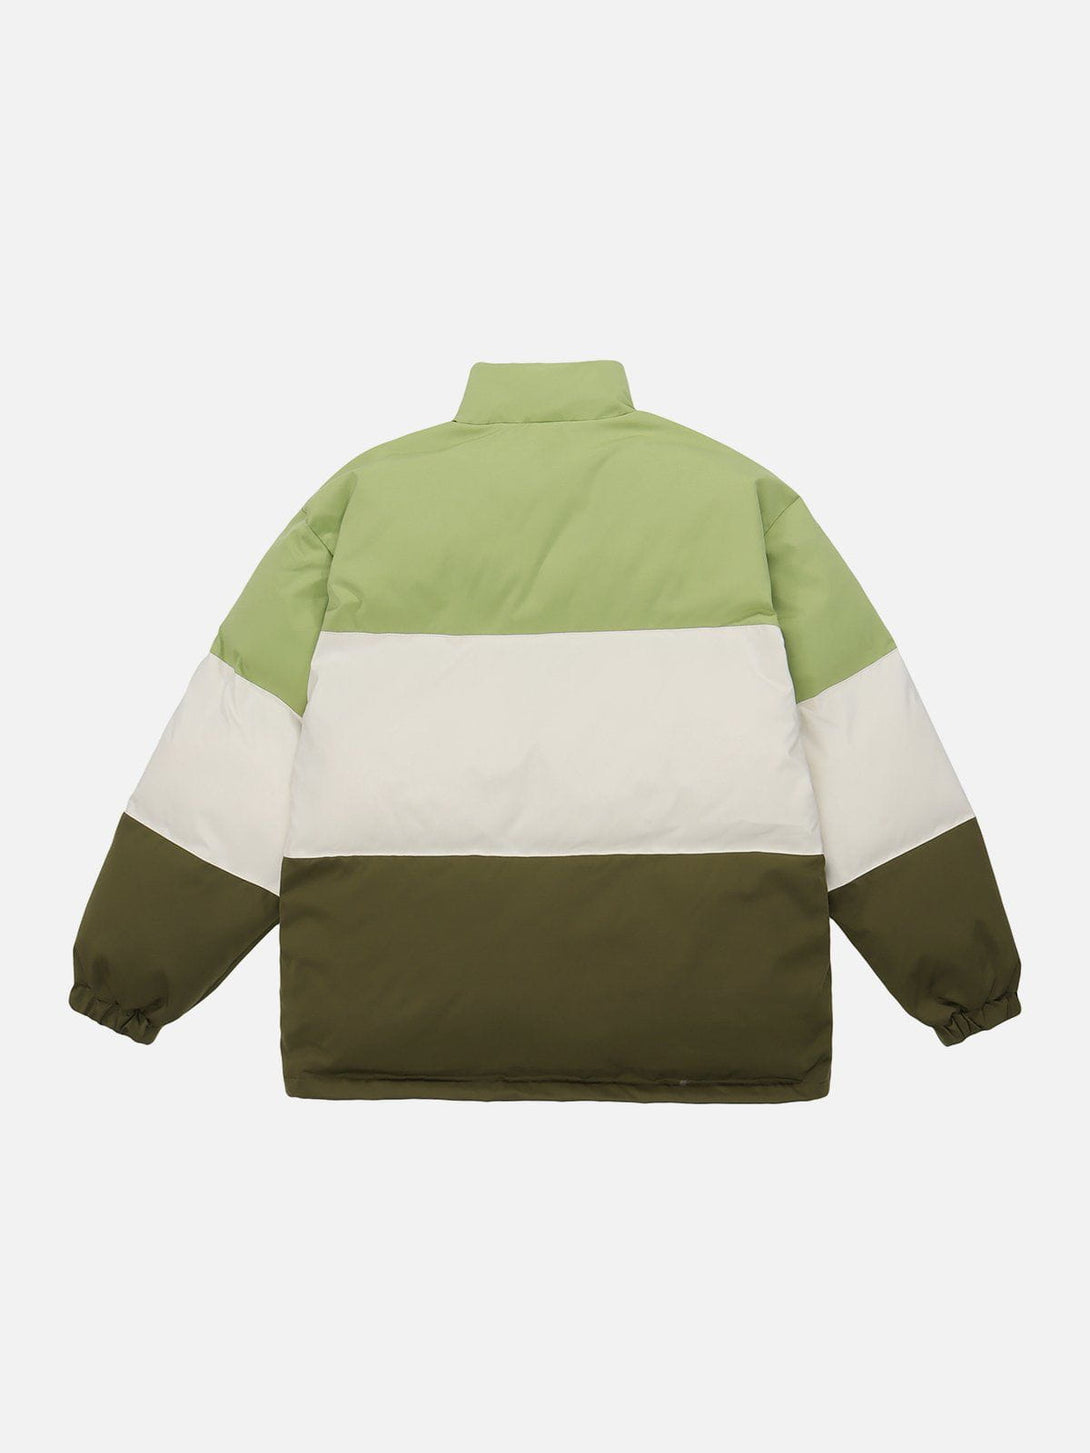 Levefly - Retro Colorblock Stand Collar Winter Coat - Streetwear Fashion - levefly.com